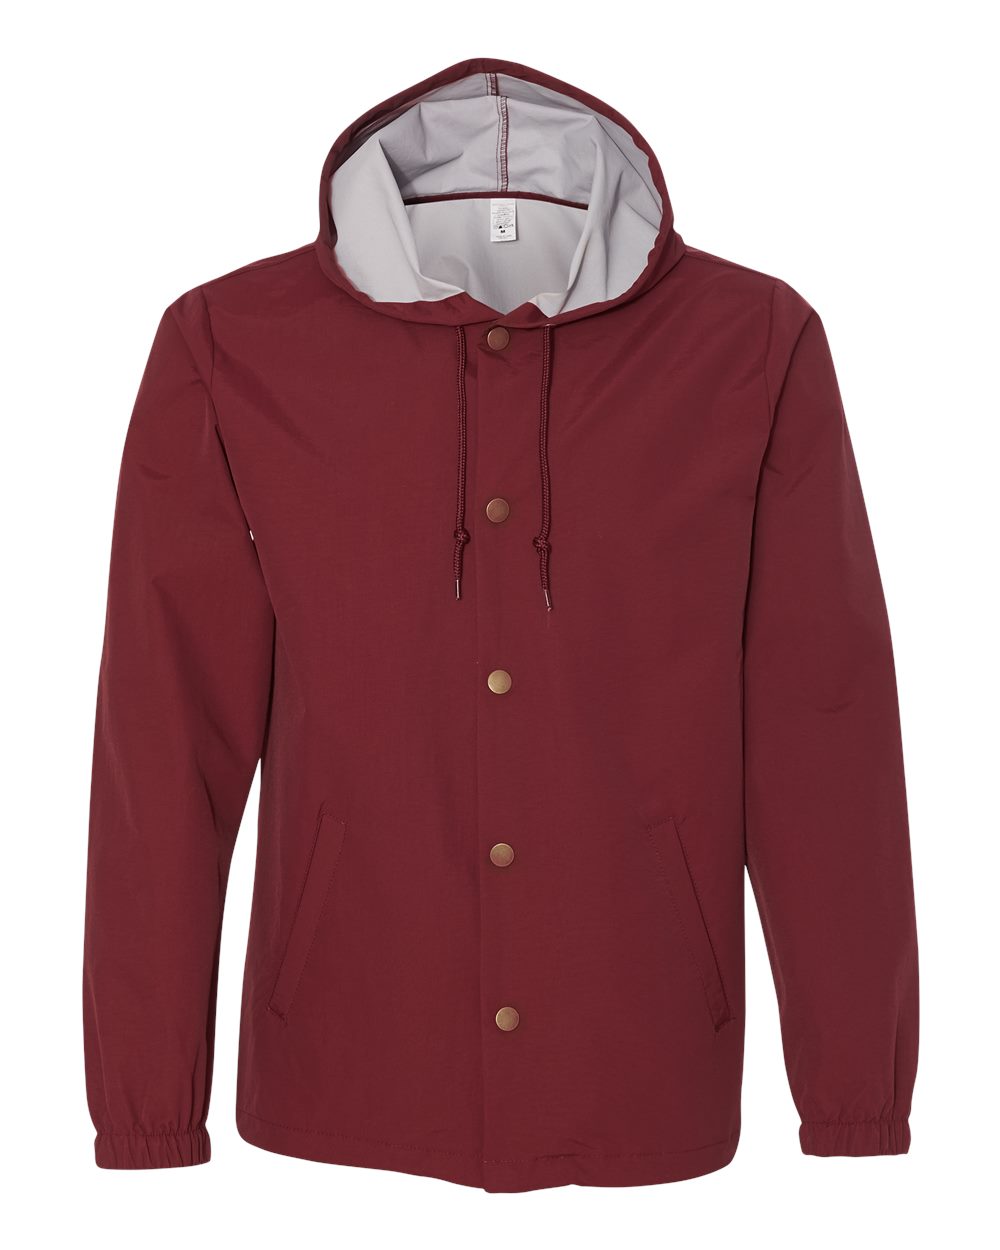 independent trading co hooded windbreaker coachs jacket cardinal